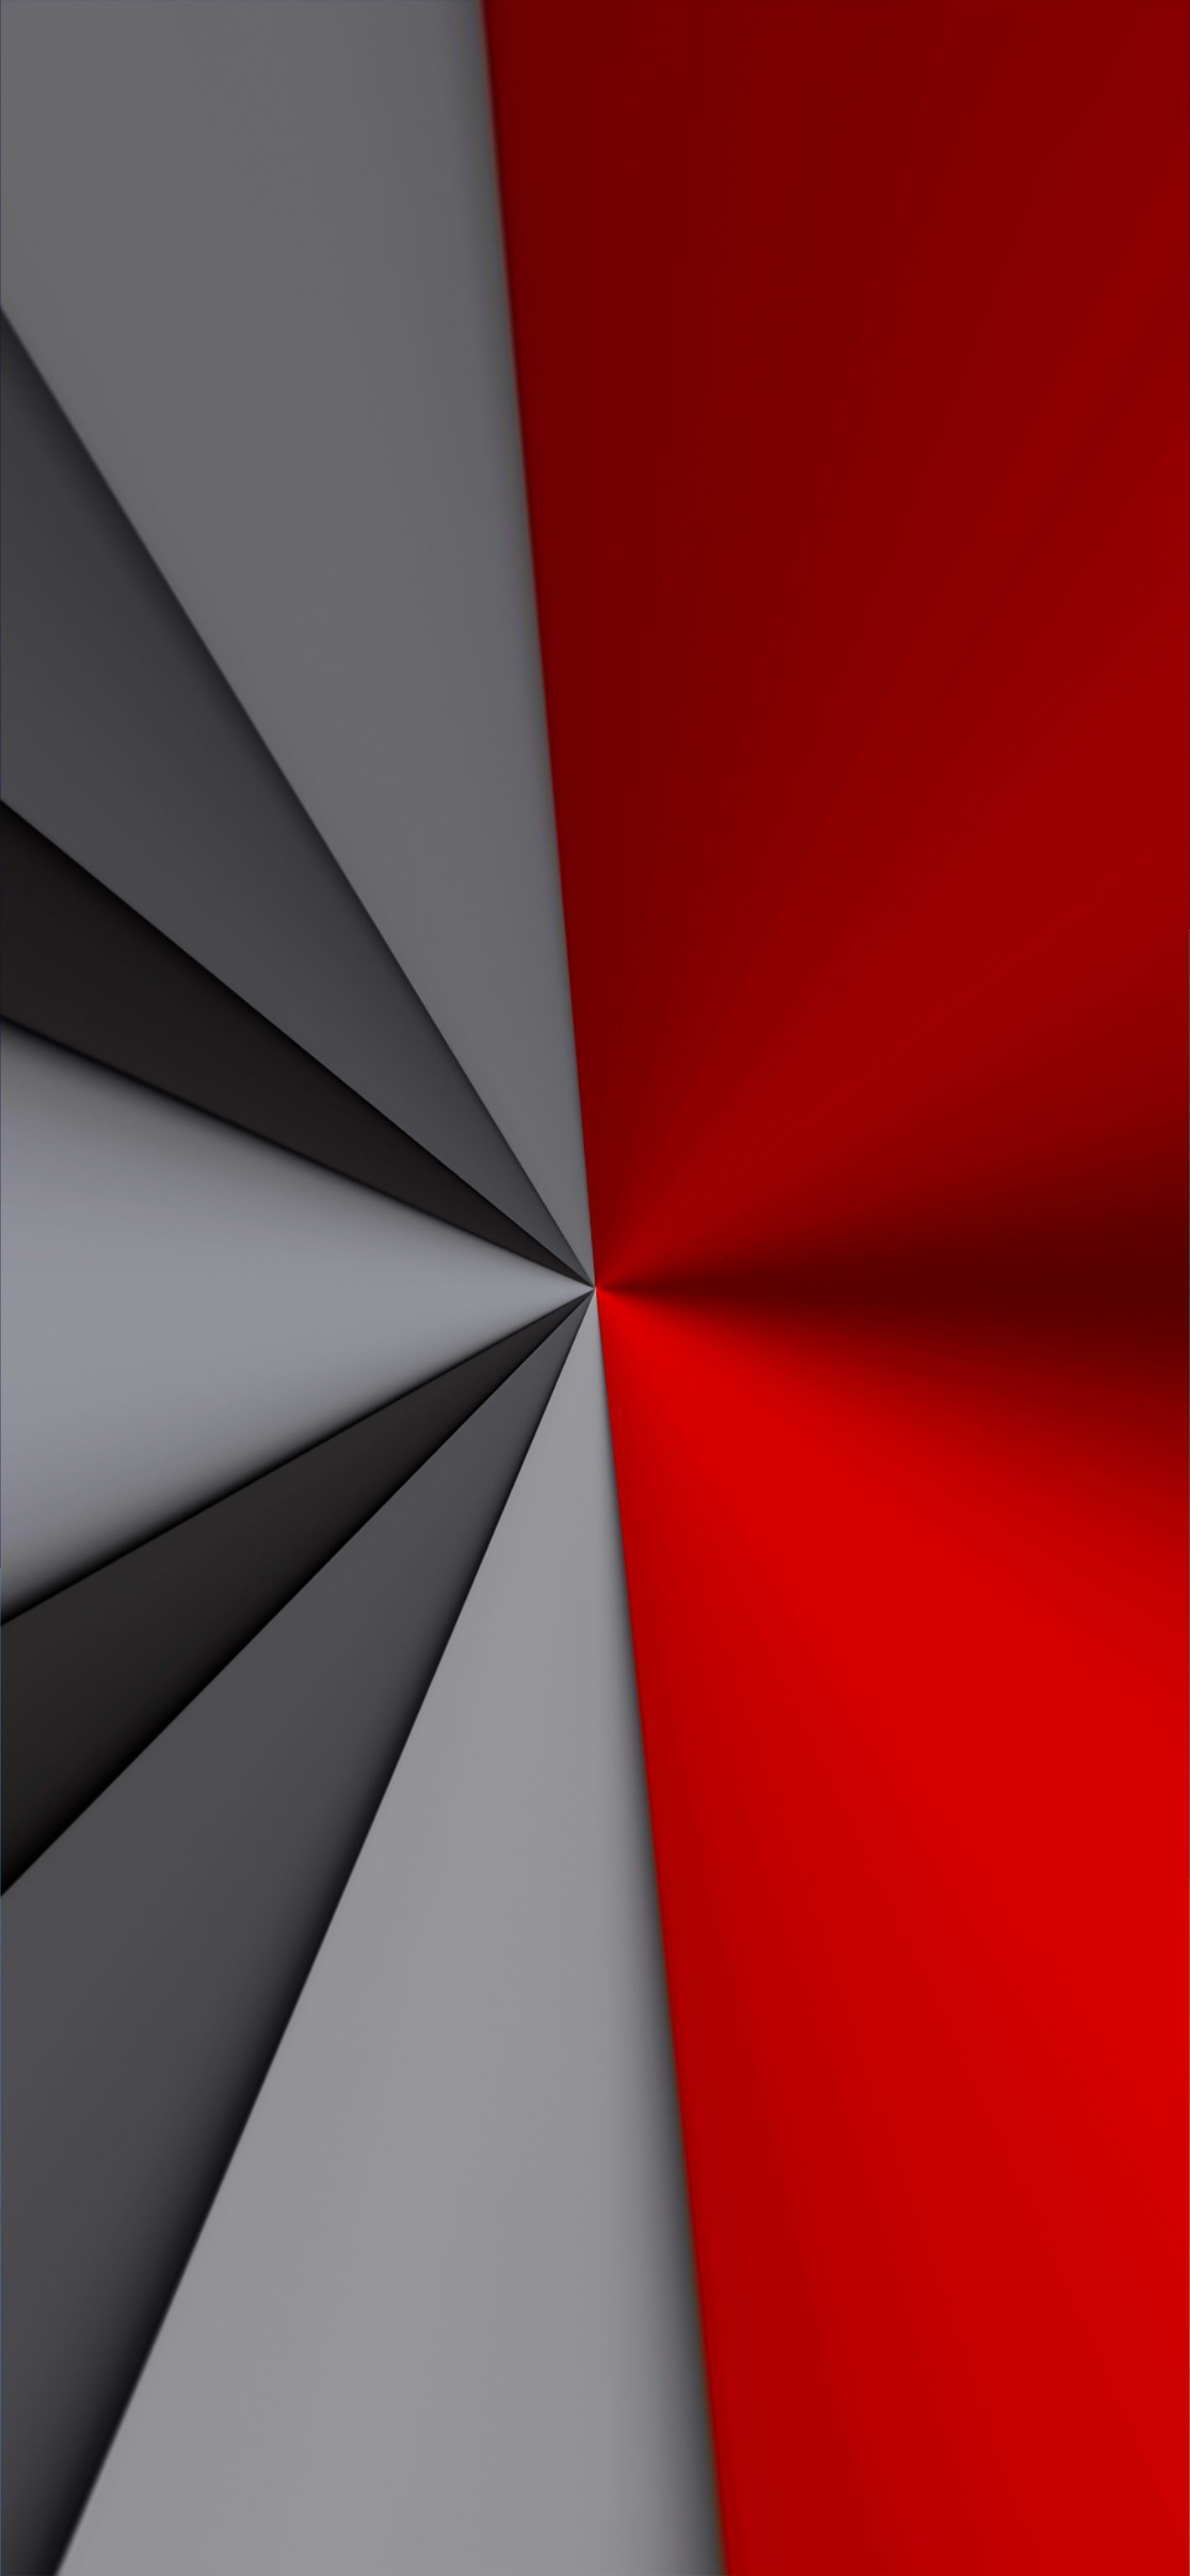 Radial Red and Gray